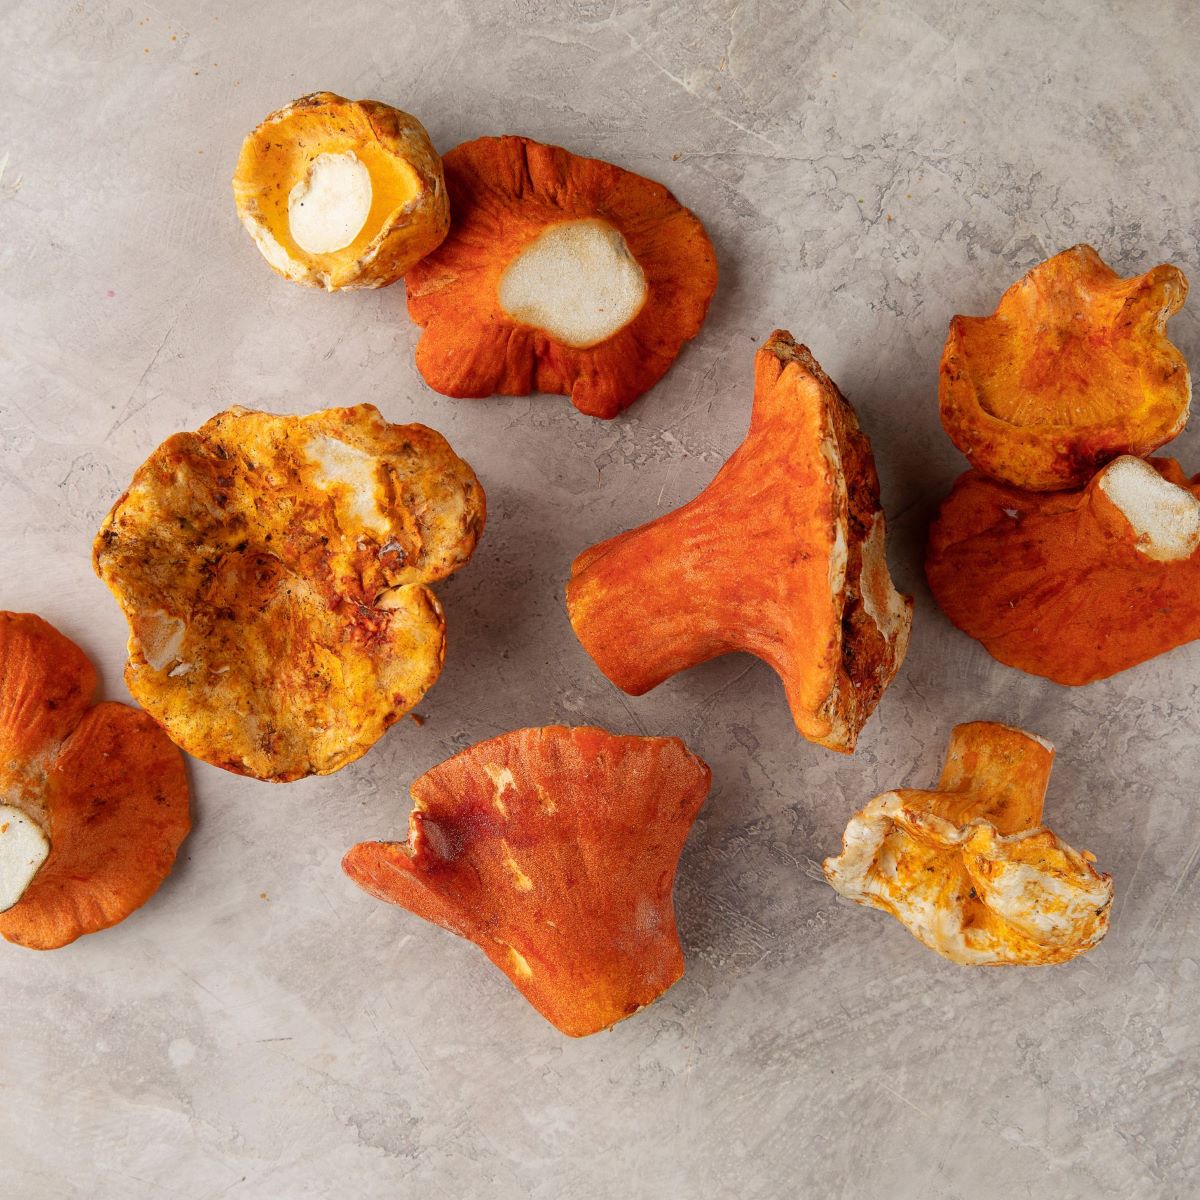 How To Store Lobster Mushrooms